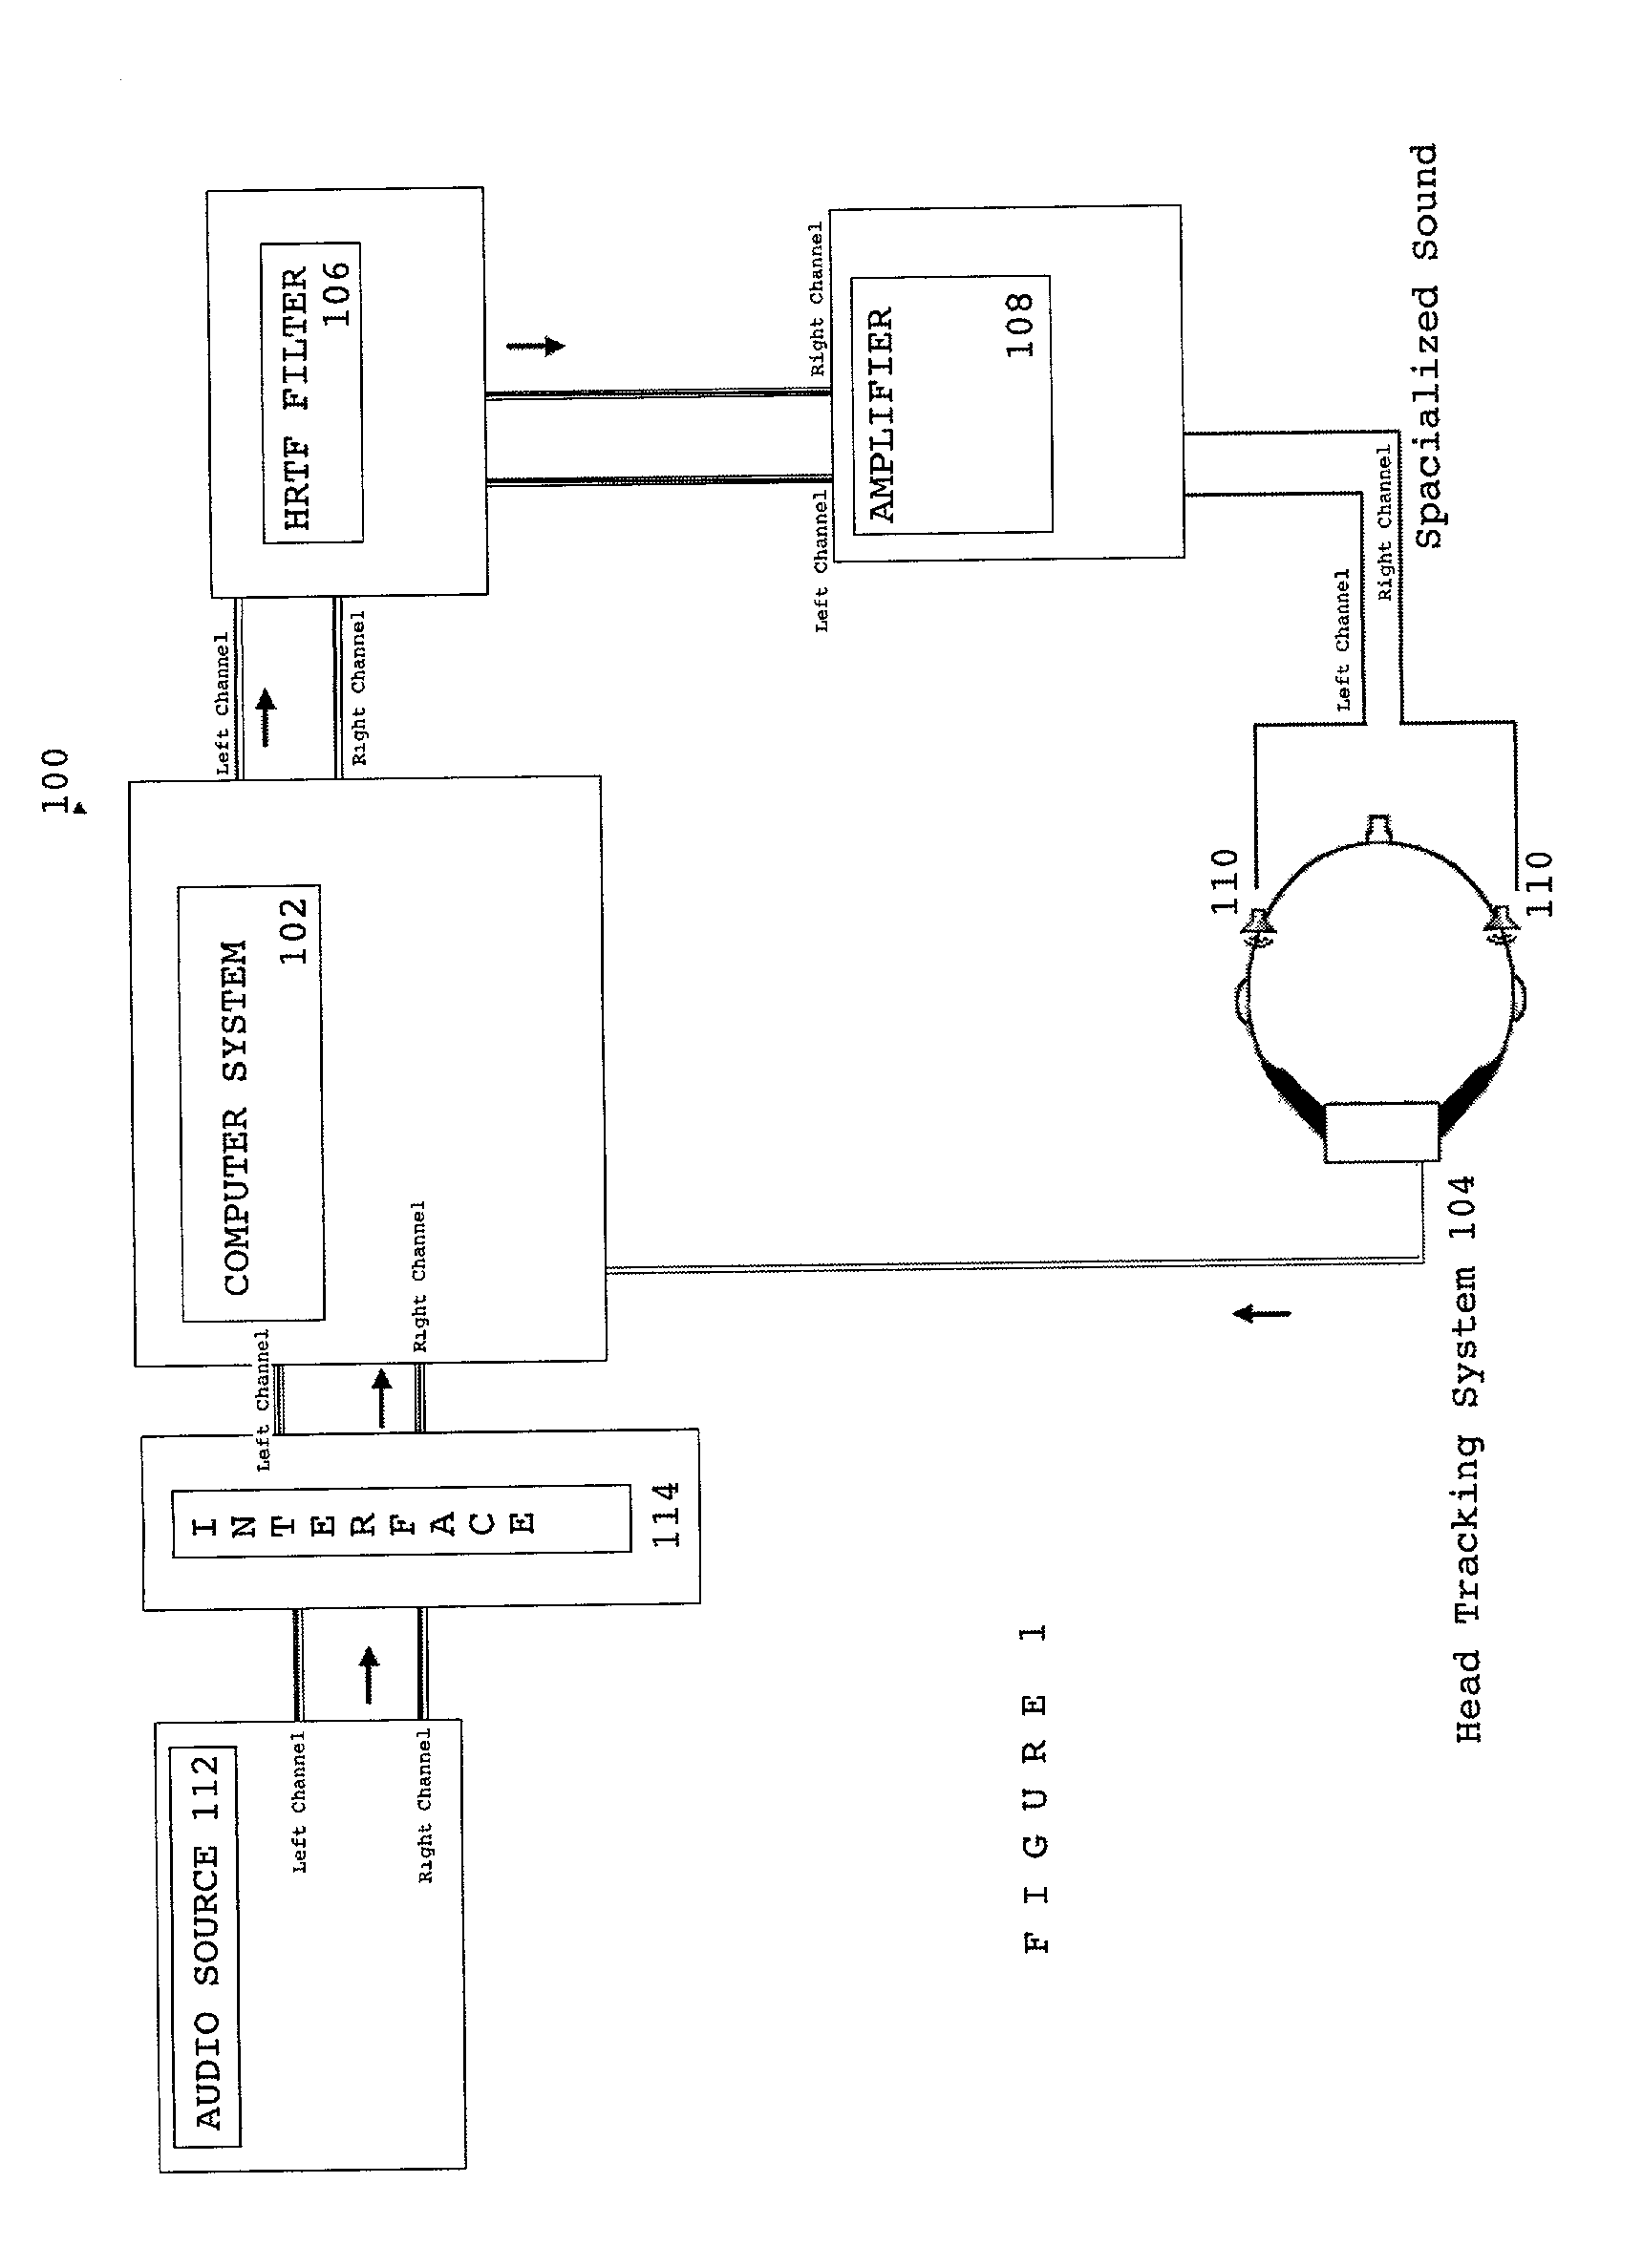 Method and apparatus for producing spatialized audio signals